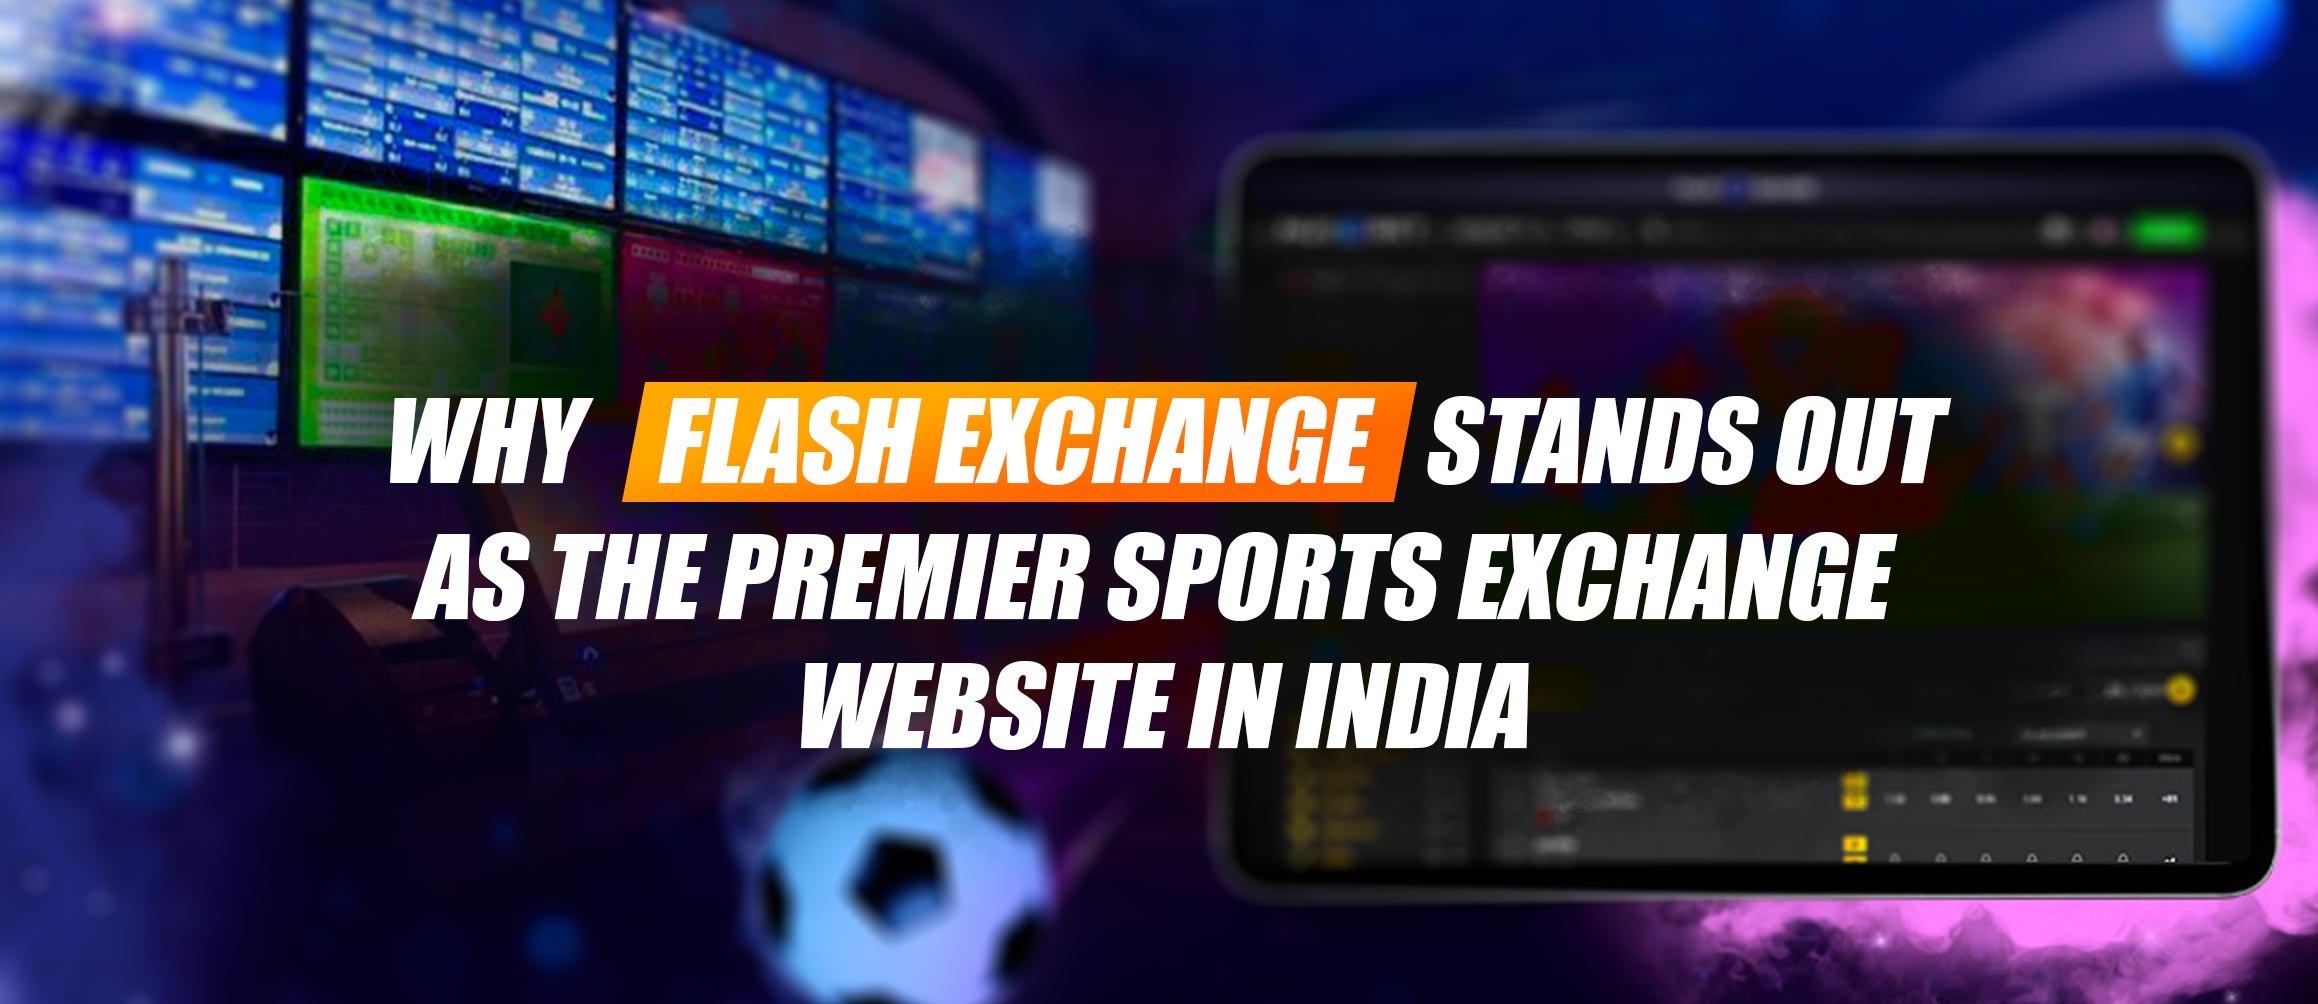 Why Flash Exchange Stands Out as the Premier Sports Exchange Website in India